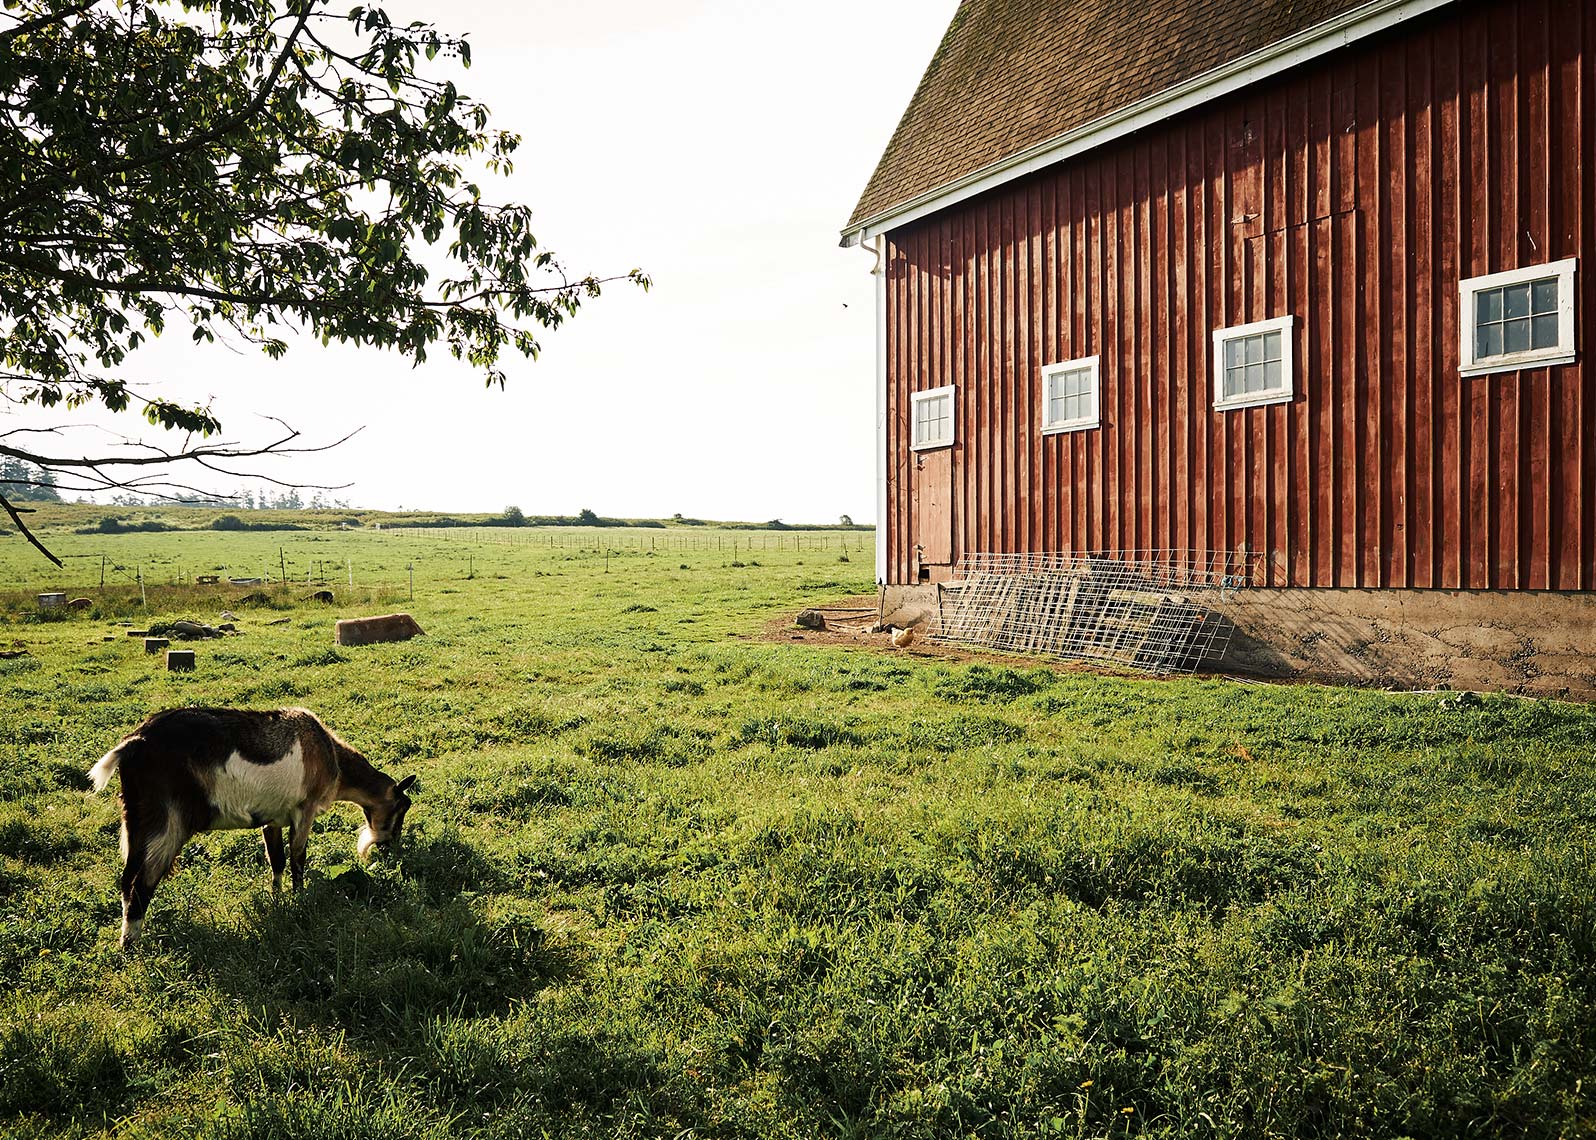 Goat grazes in front of a barn.